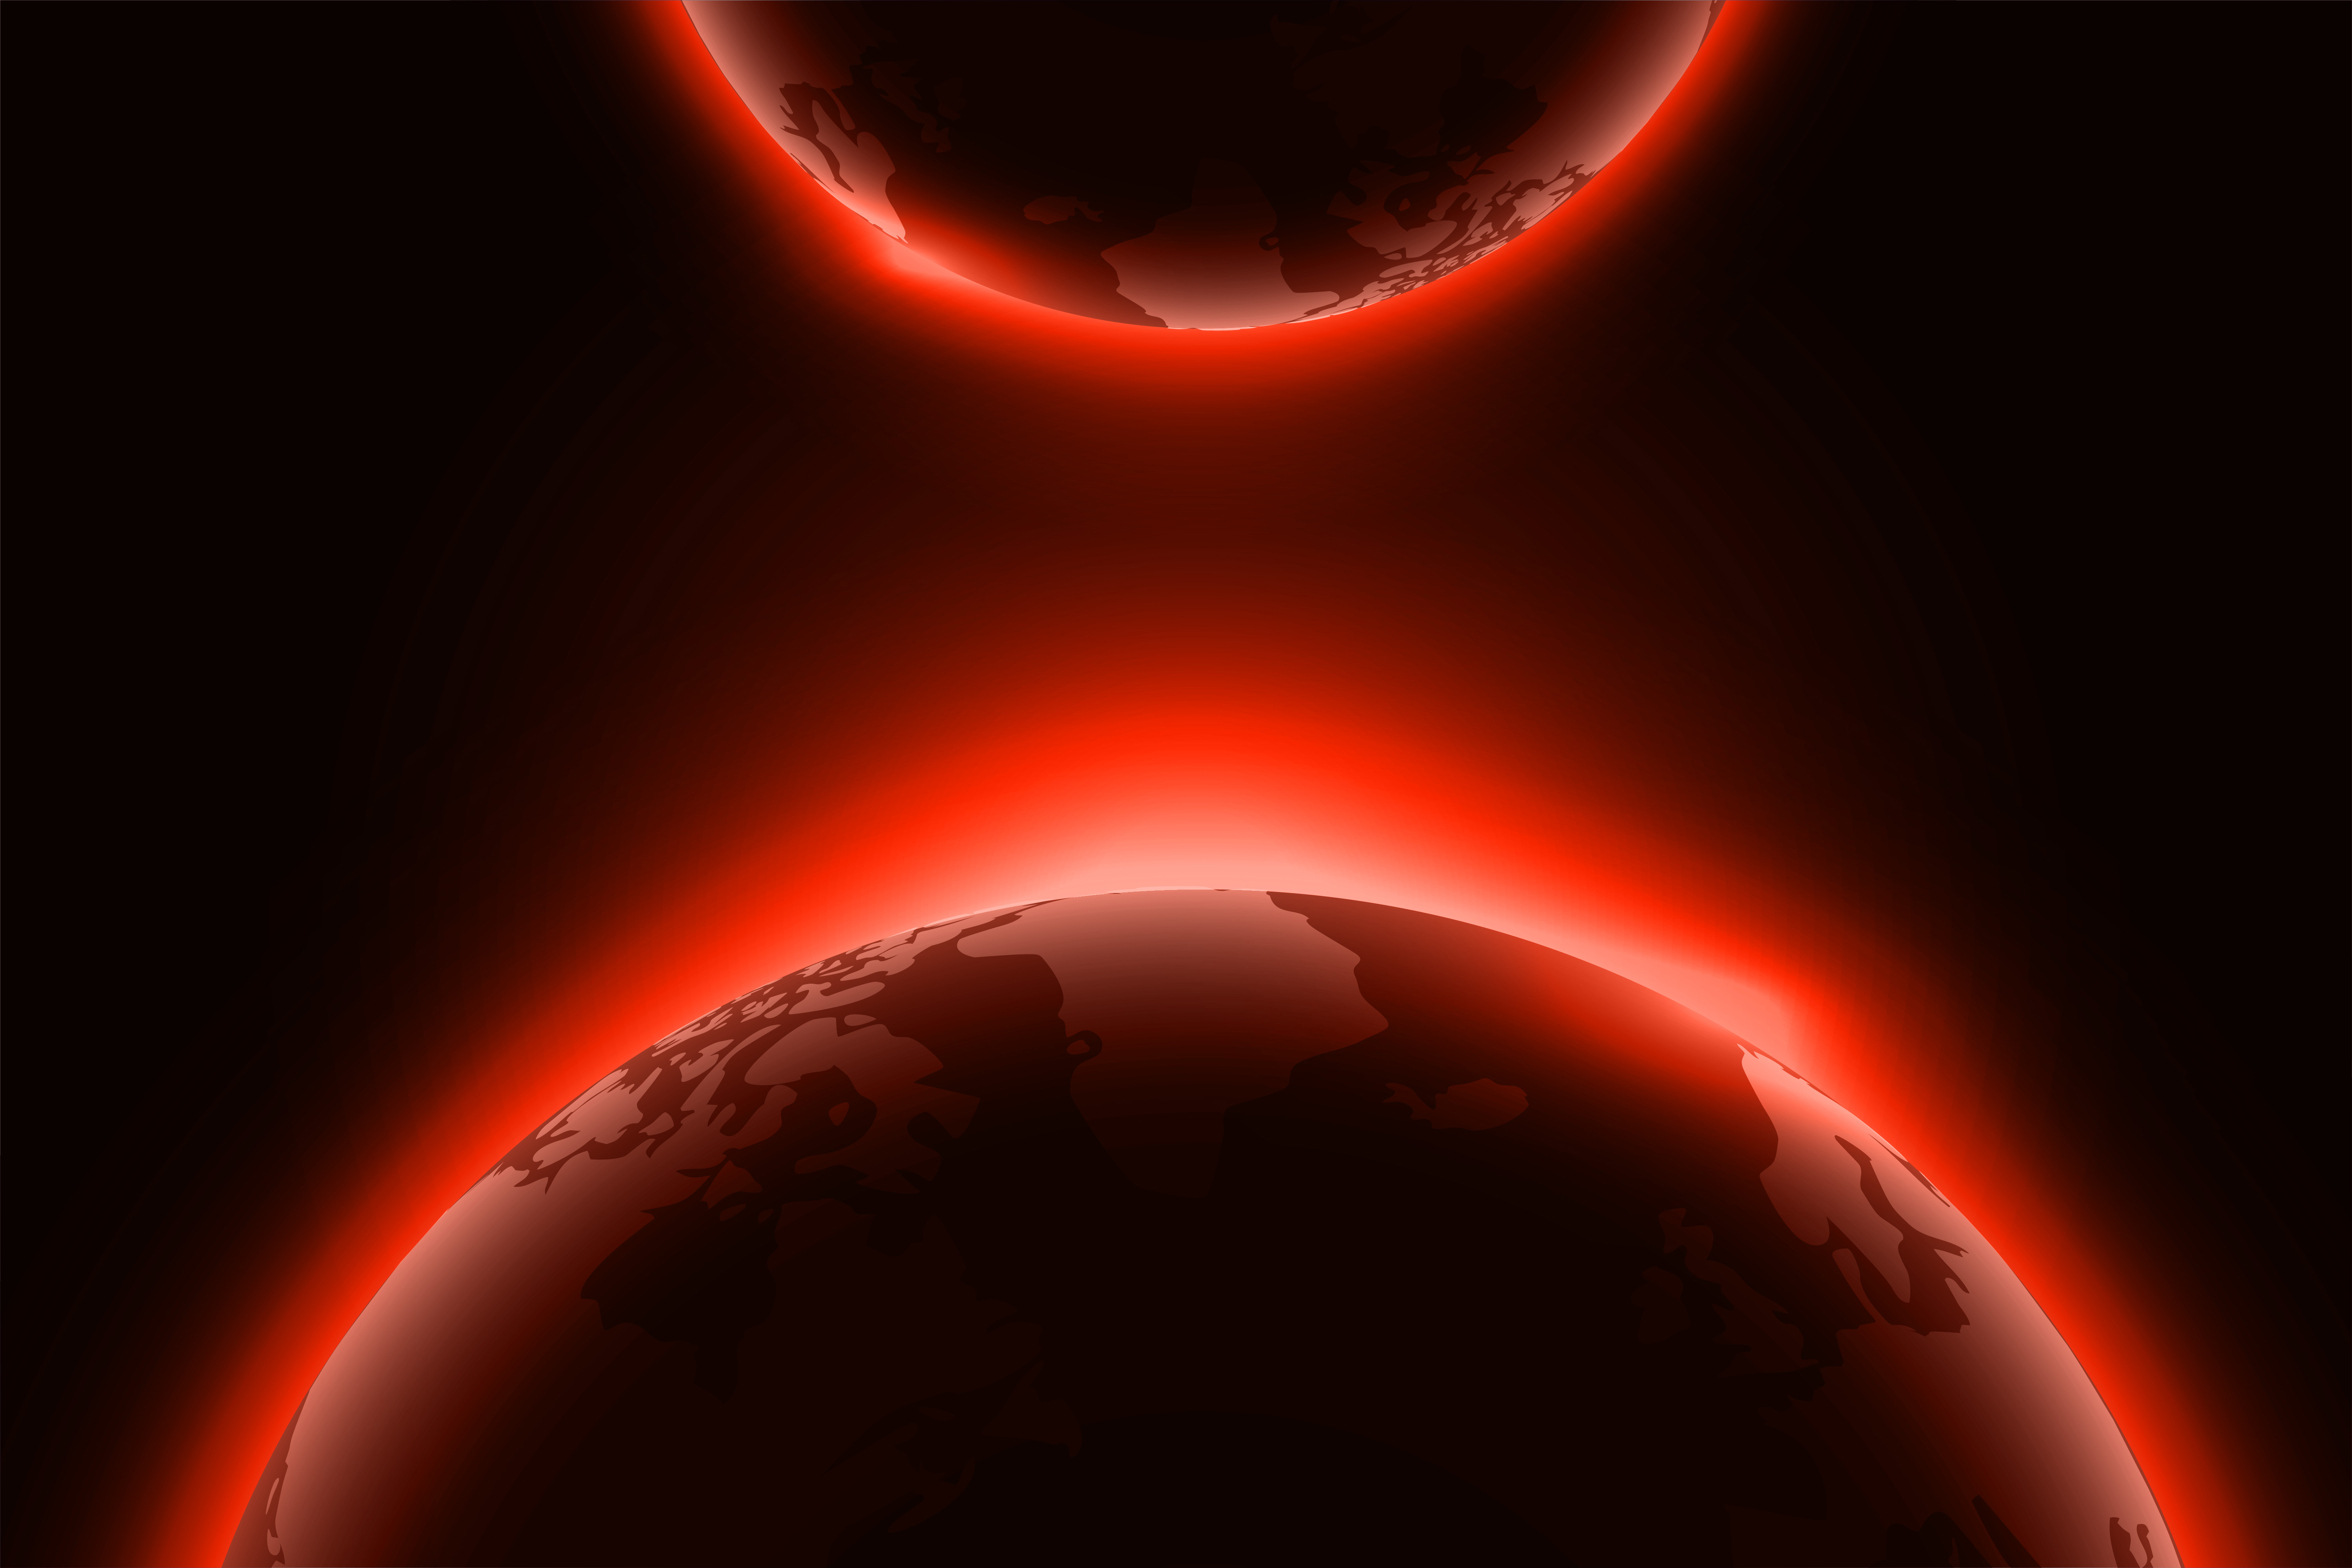 glowing red planet on black background - Download Free Vector Art, Stock Graphics & Images